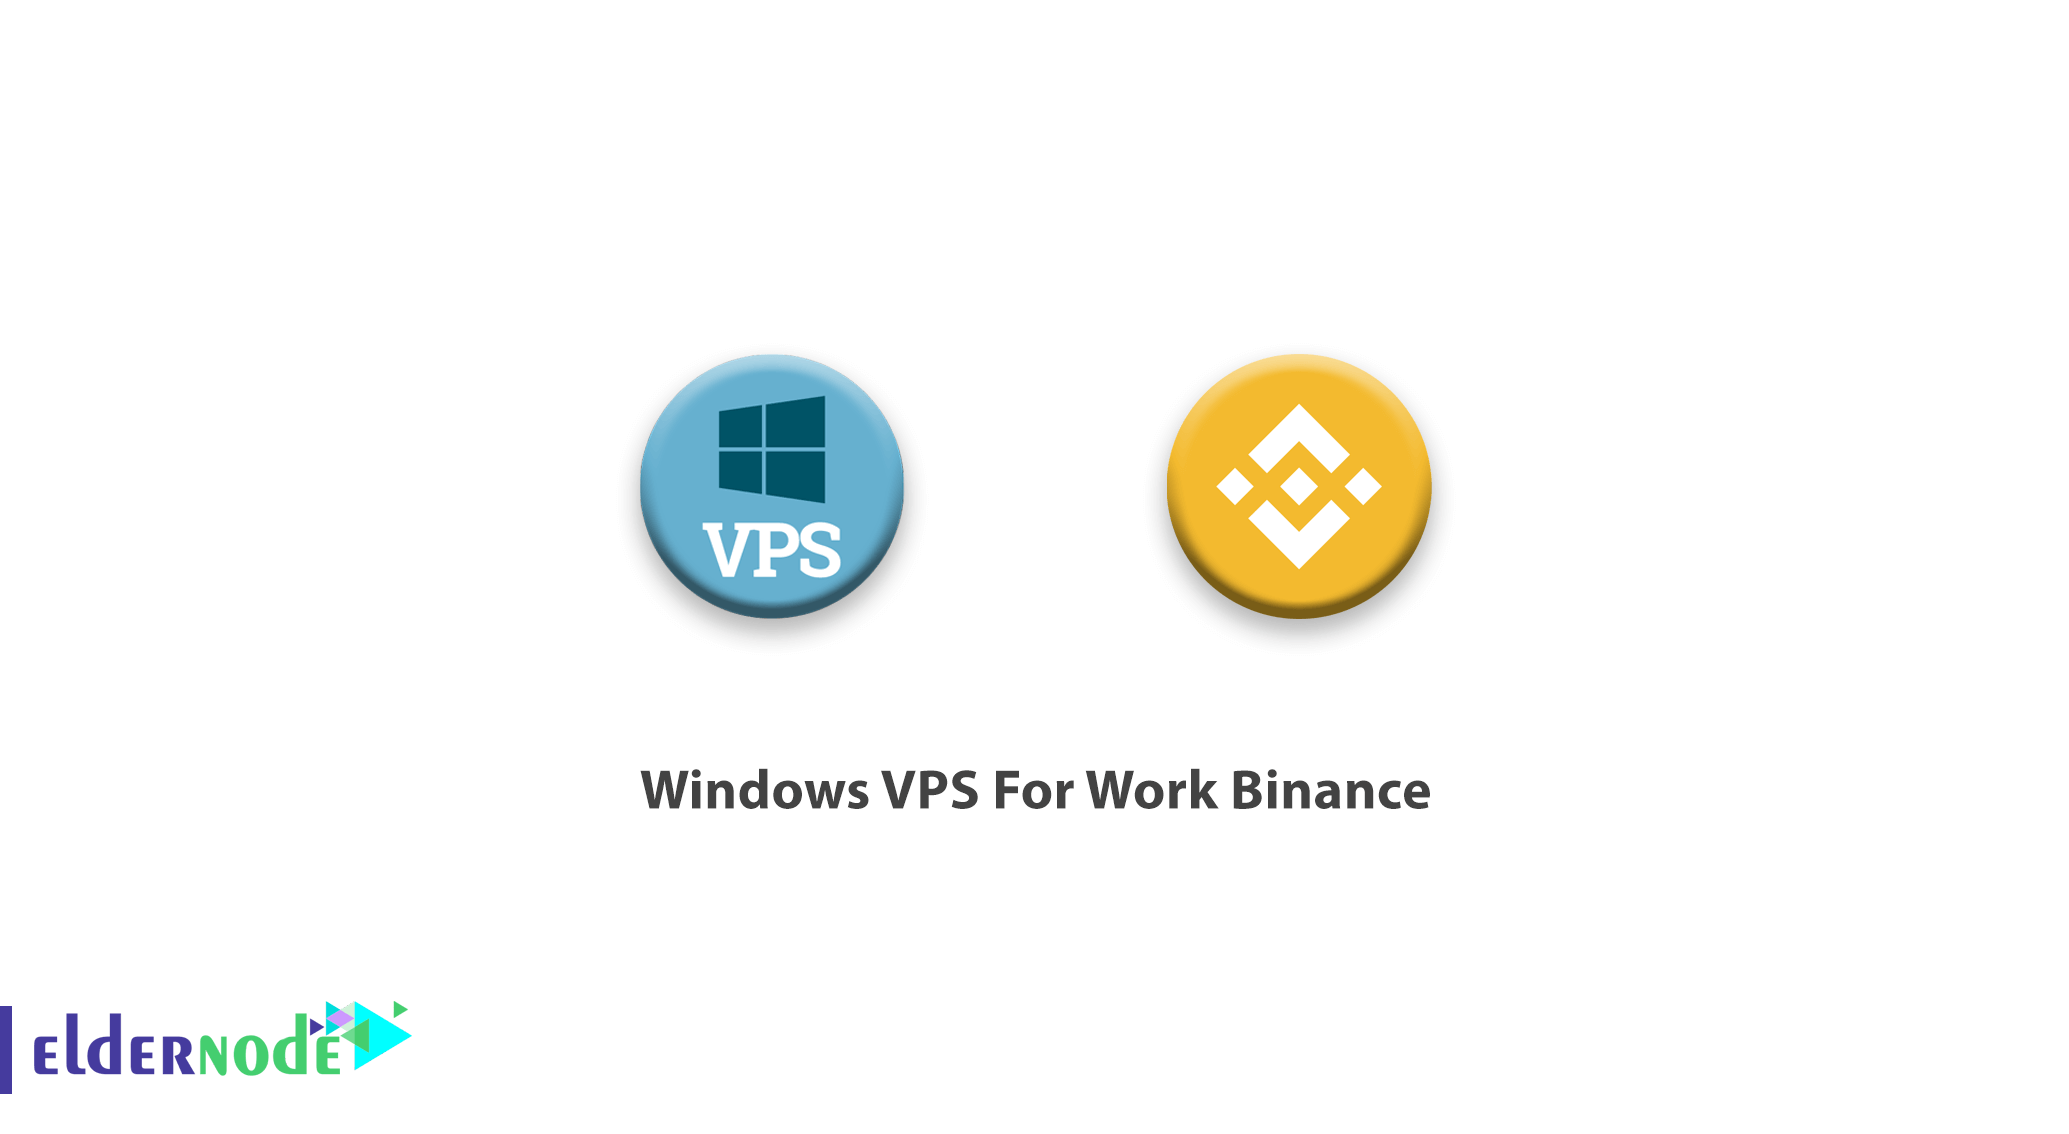 How to Buy Windows VPS For Work Binance and trade ...